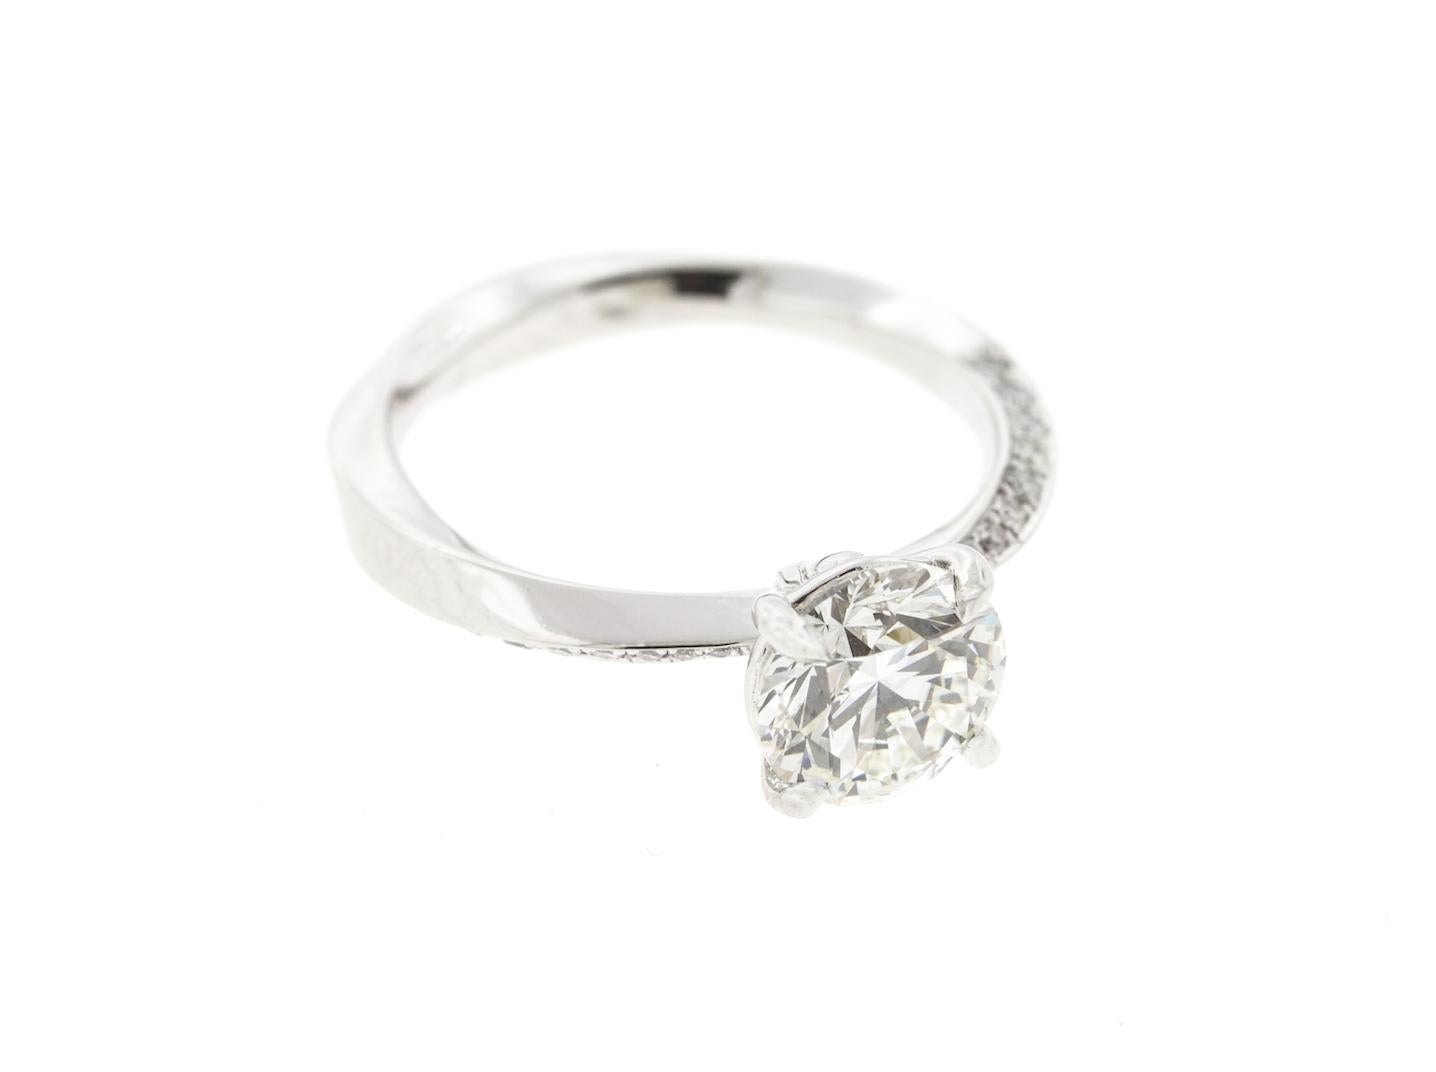 This custom diamond engagement ring features a twisted shank and half diamond pave around the band. With a round diamond center stone and a four prong setting, the ring has a head-on shank setting and can be customized for any shape center